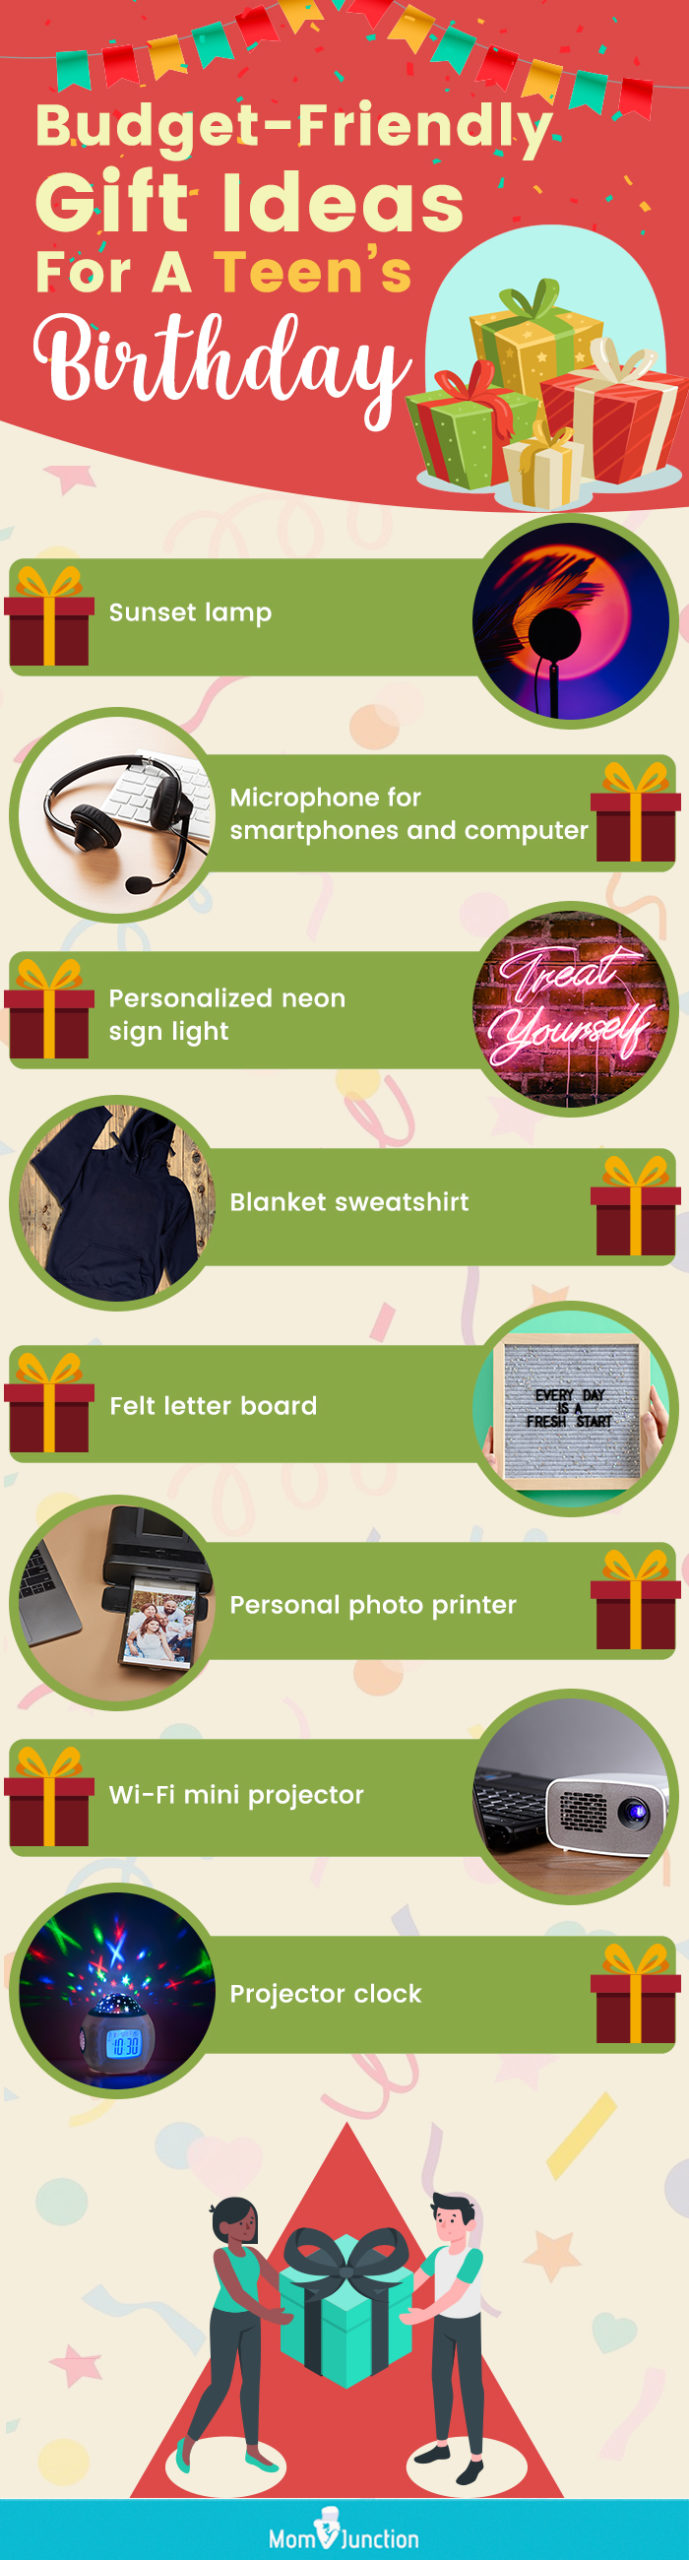 budget friendly gift ideas for a teens birthday [infographic]